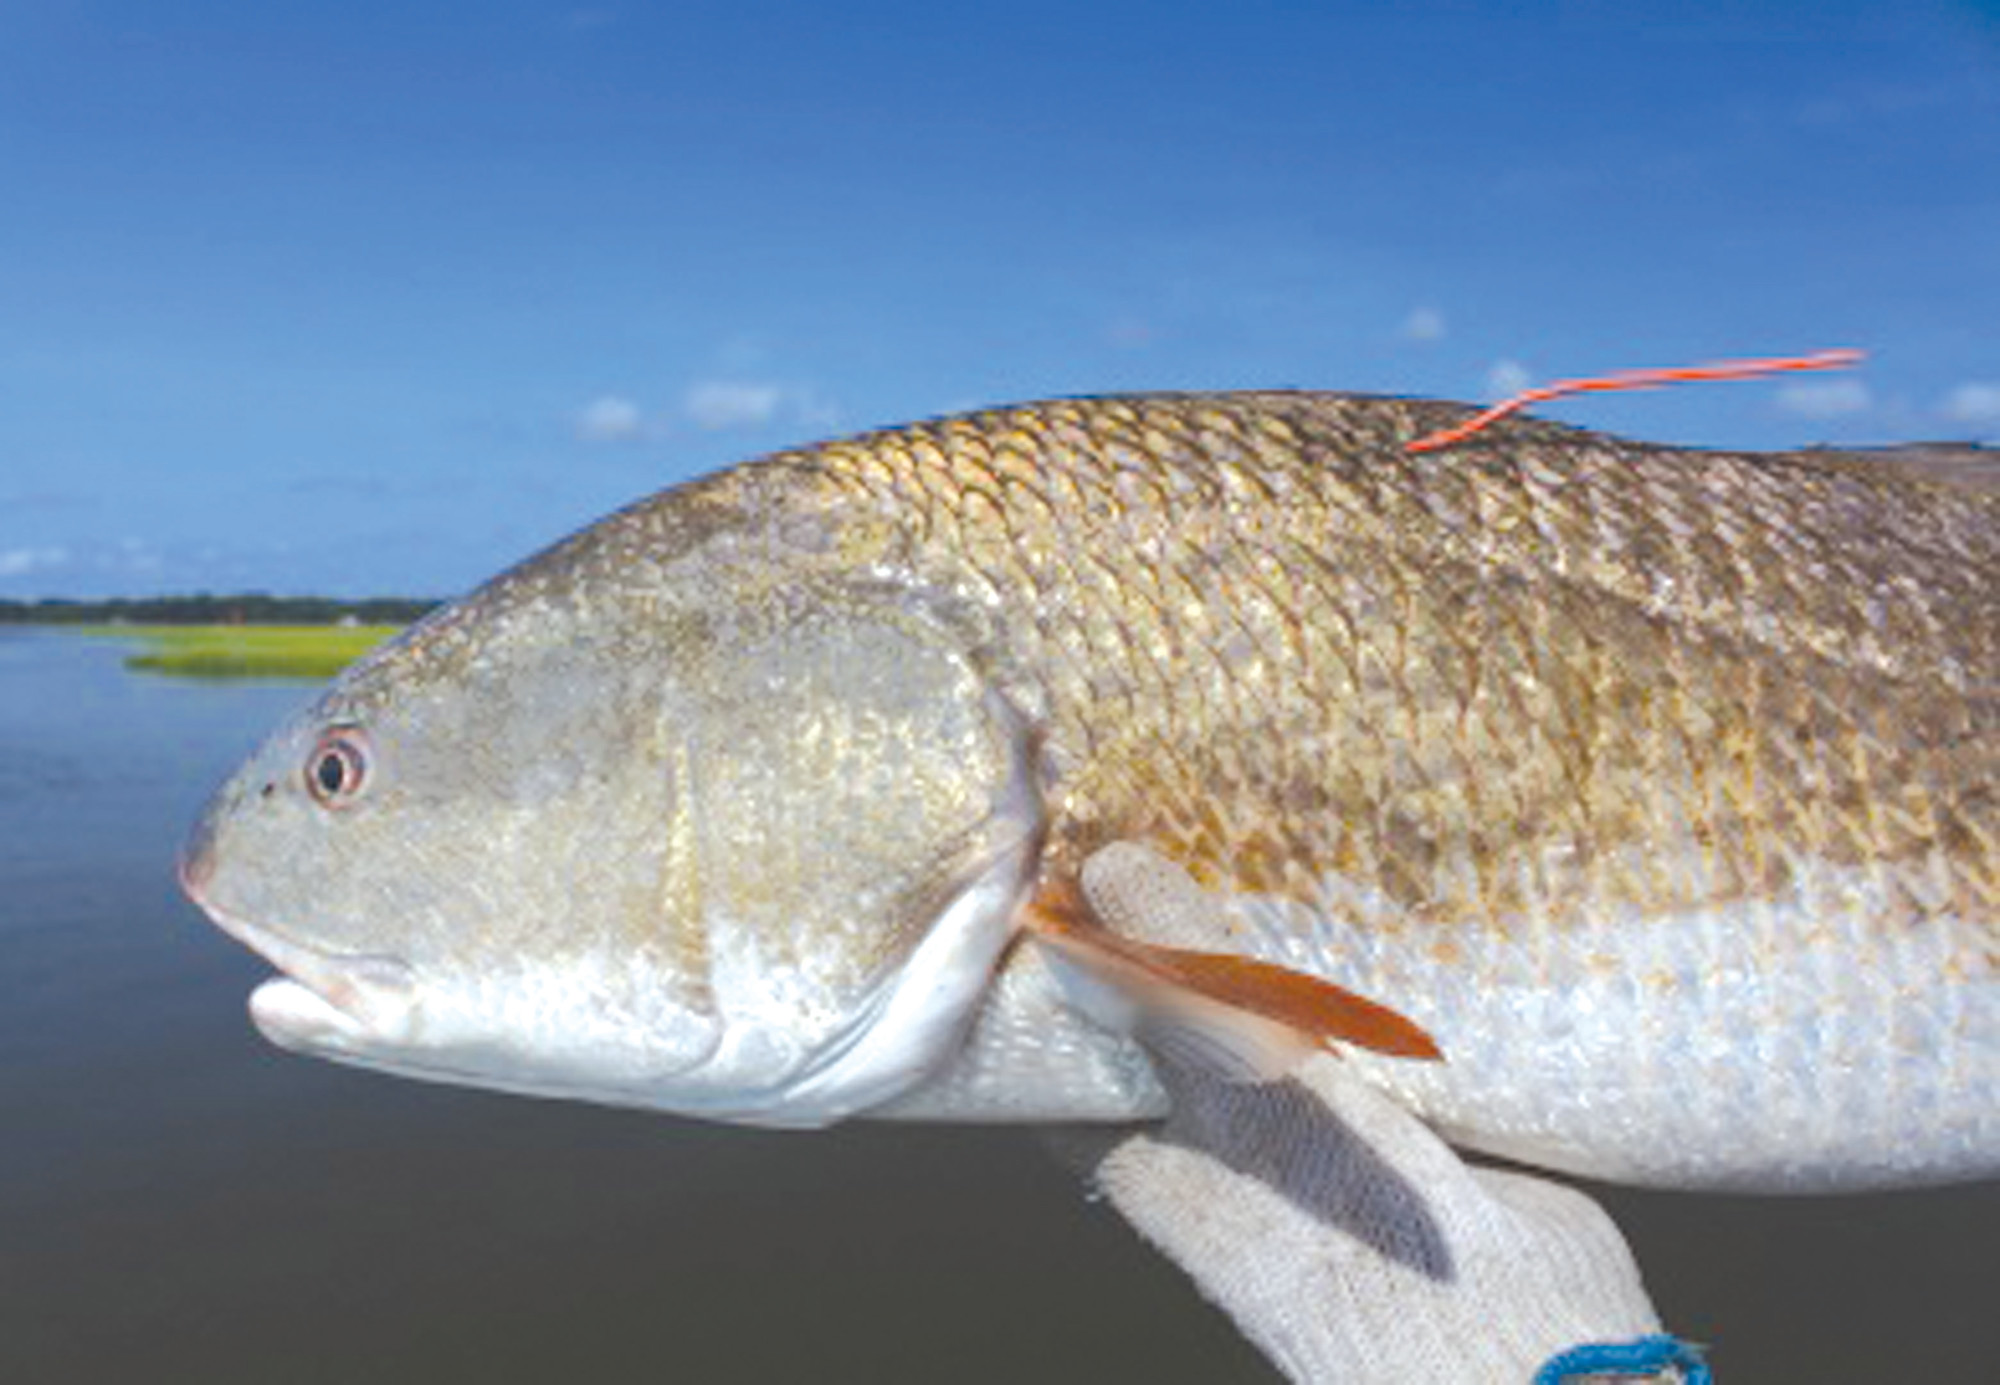 New limits for red drum will address overfishing | The ...